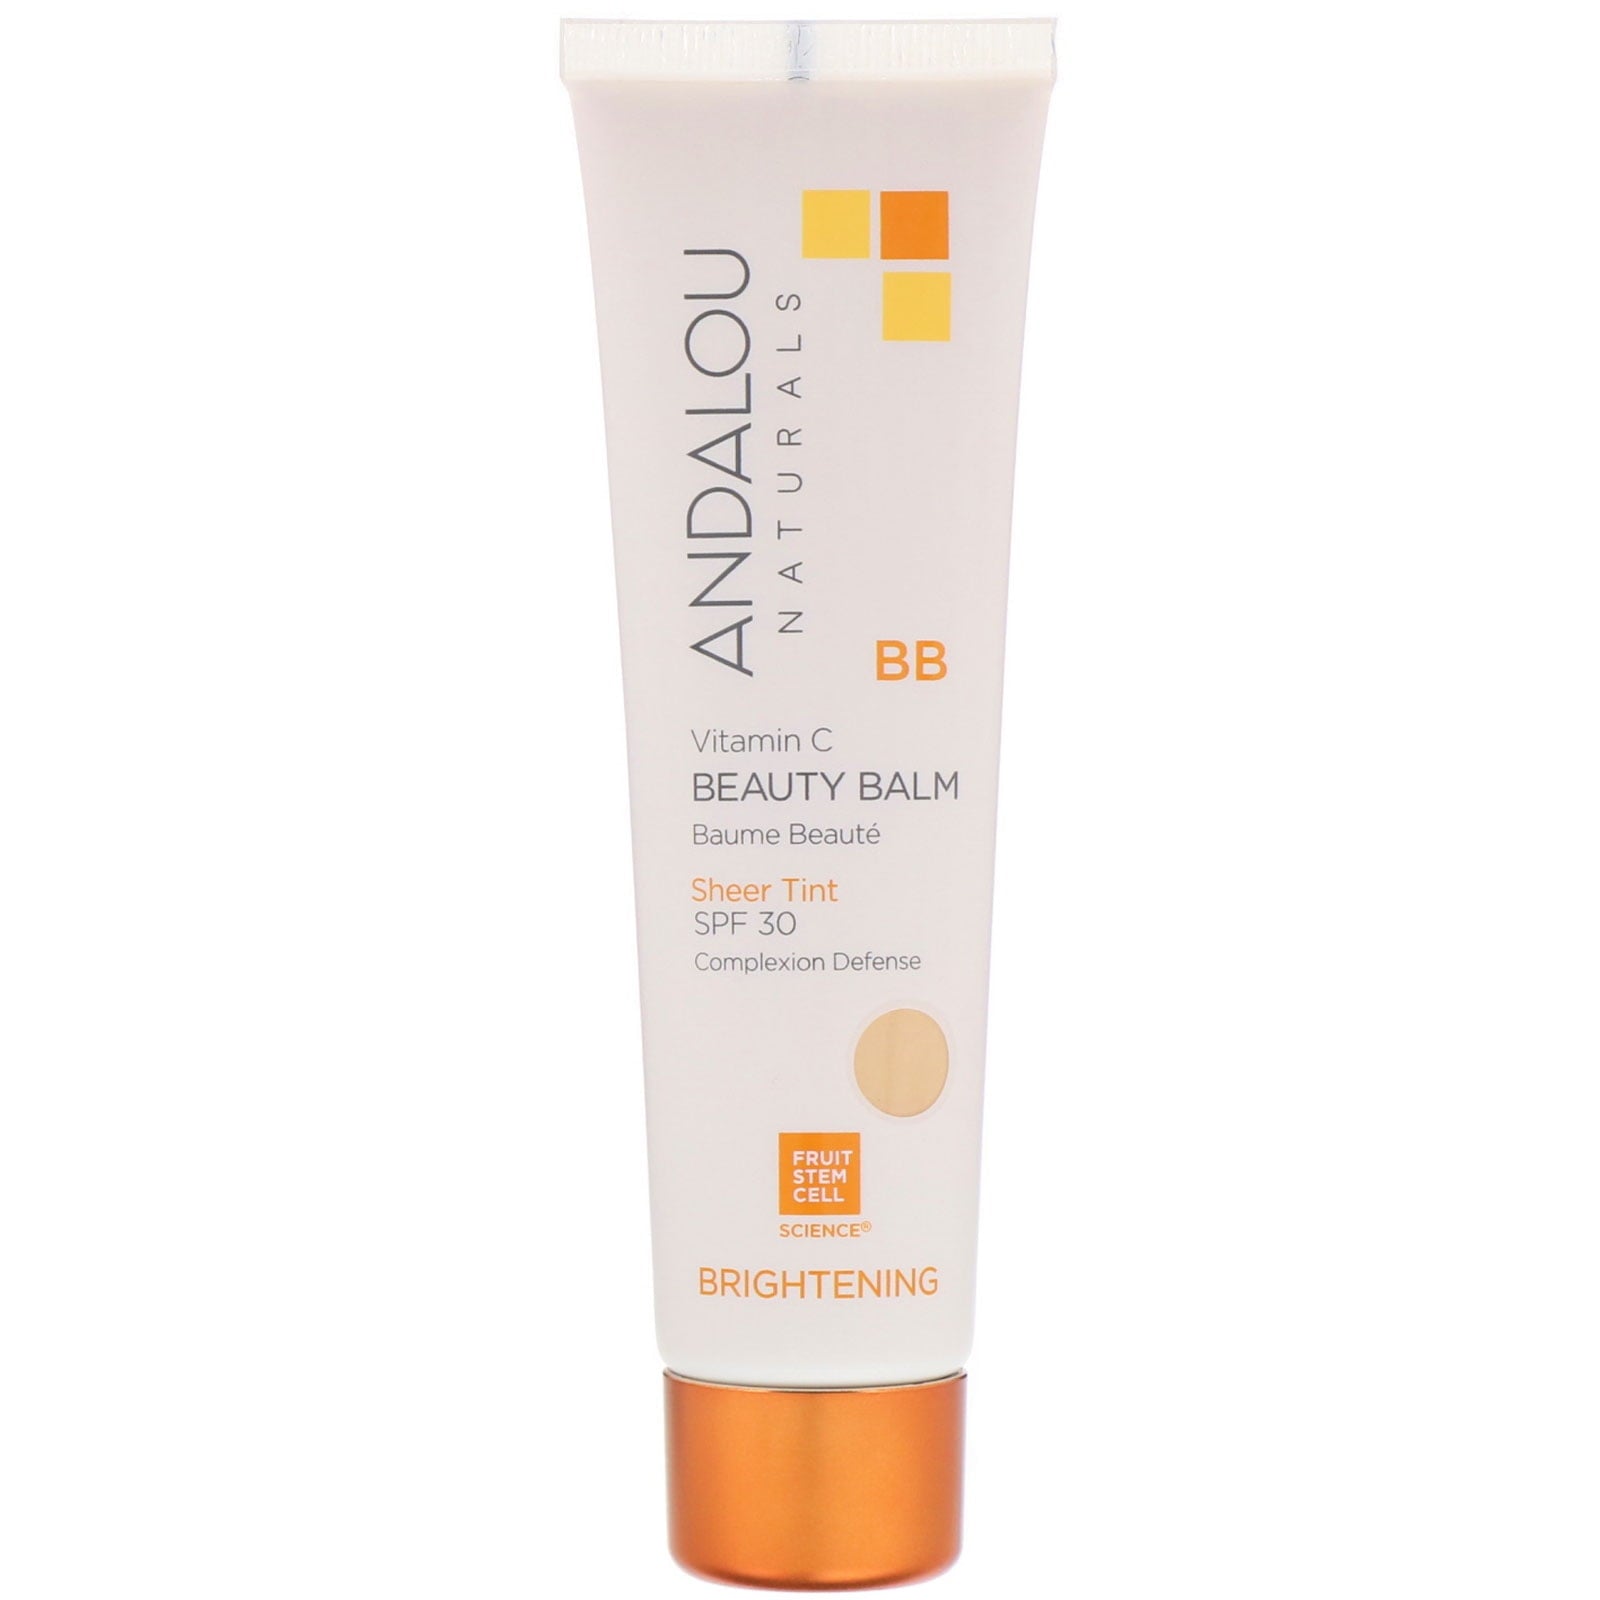 Andalou Naturals Beauty Balm Sheer Tint with SPF 30 Brightening Moisturizer 2 oz Bottle